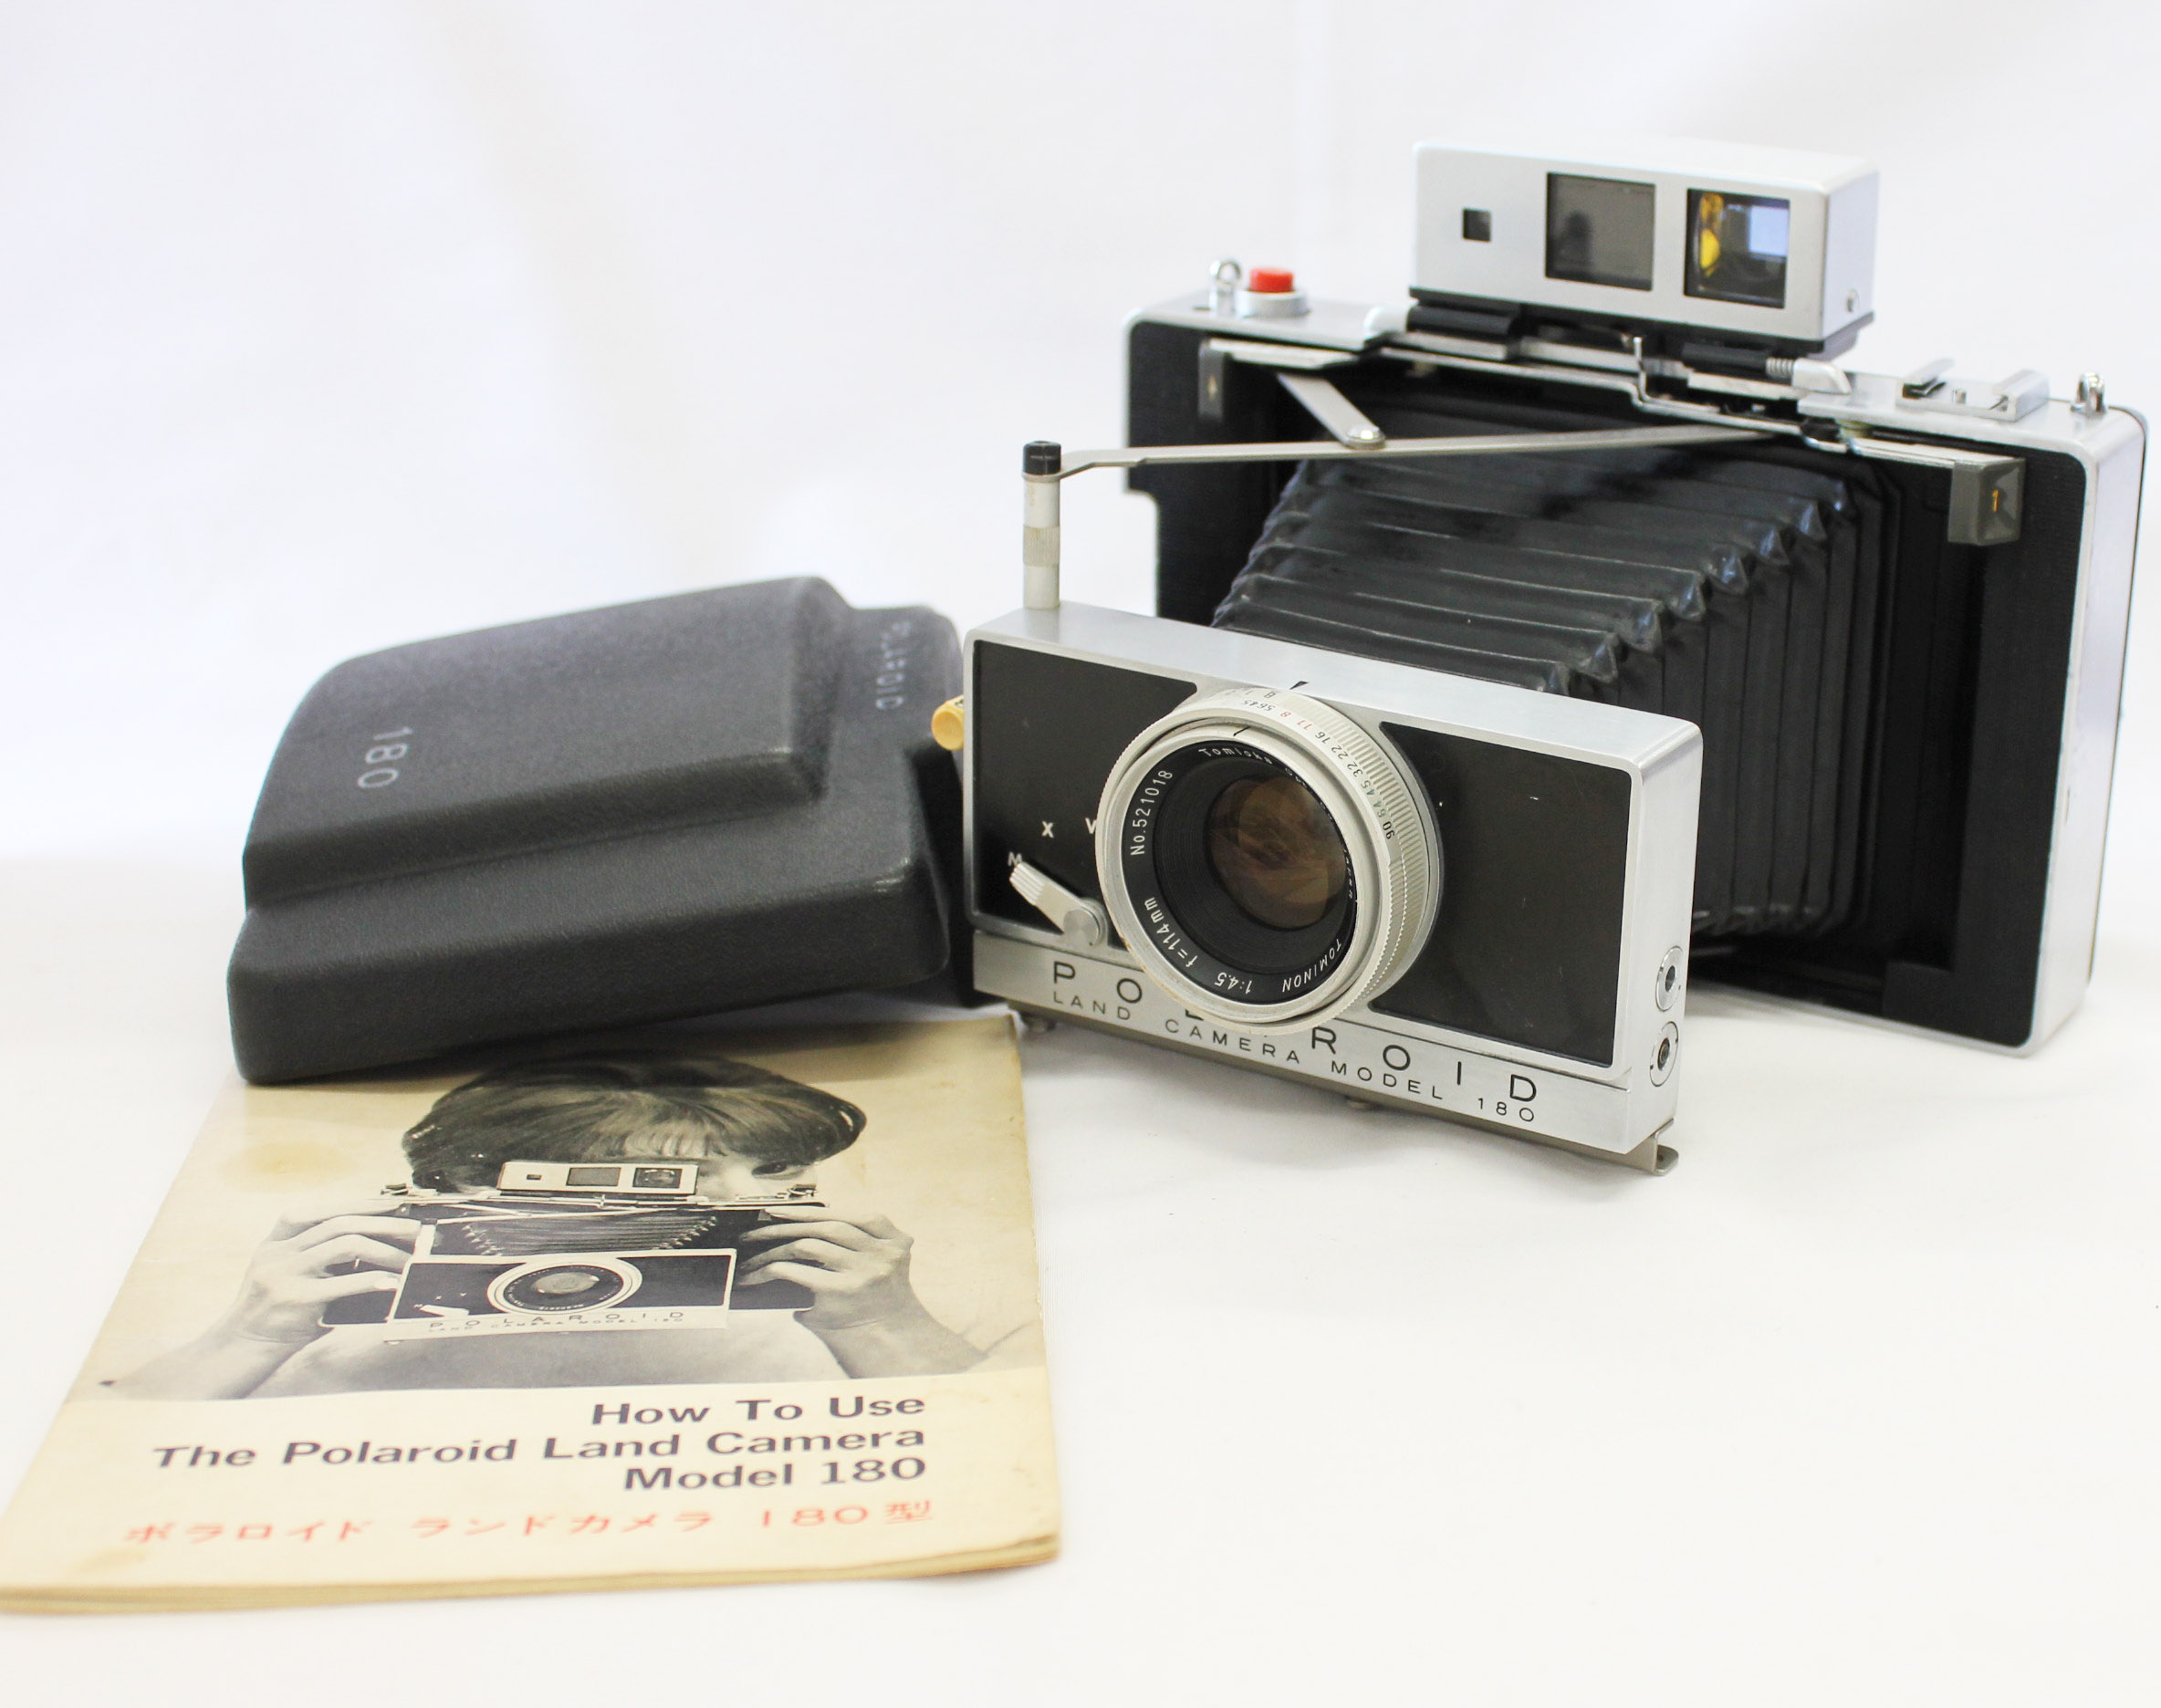 Japan Used Camera Shop | [Excellent+++++] Polaroid Land Camera Model 180 Instant Film Camera w/ Tominon 114mm F/4.5 from Japan